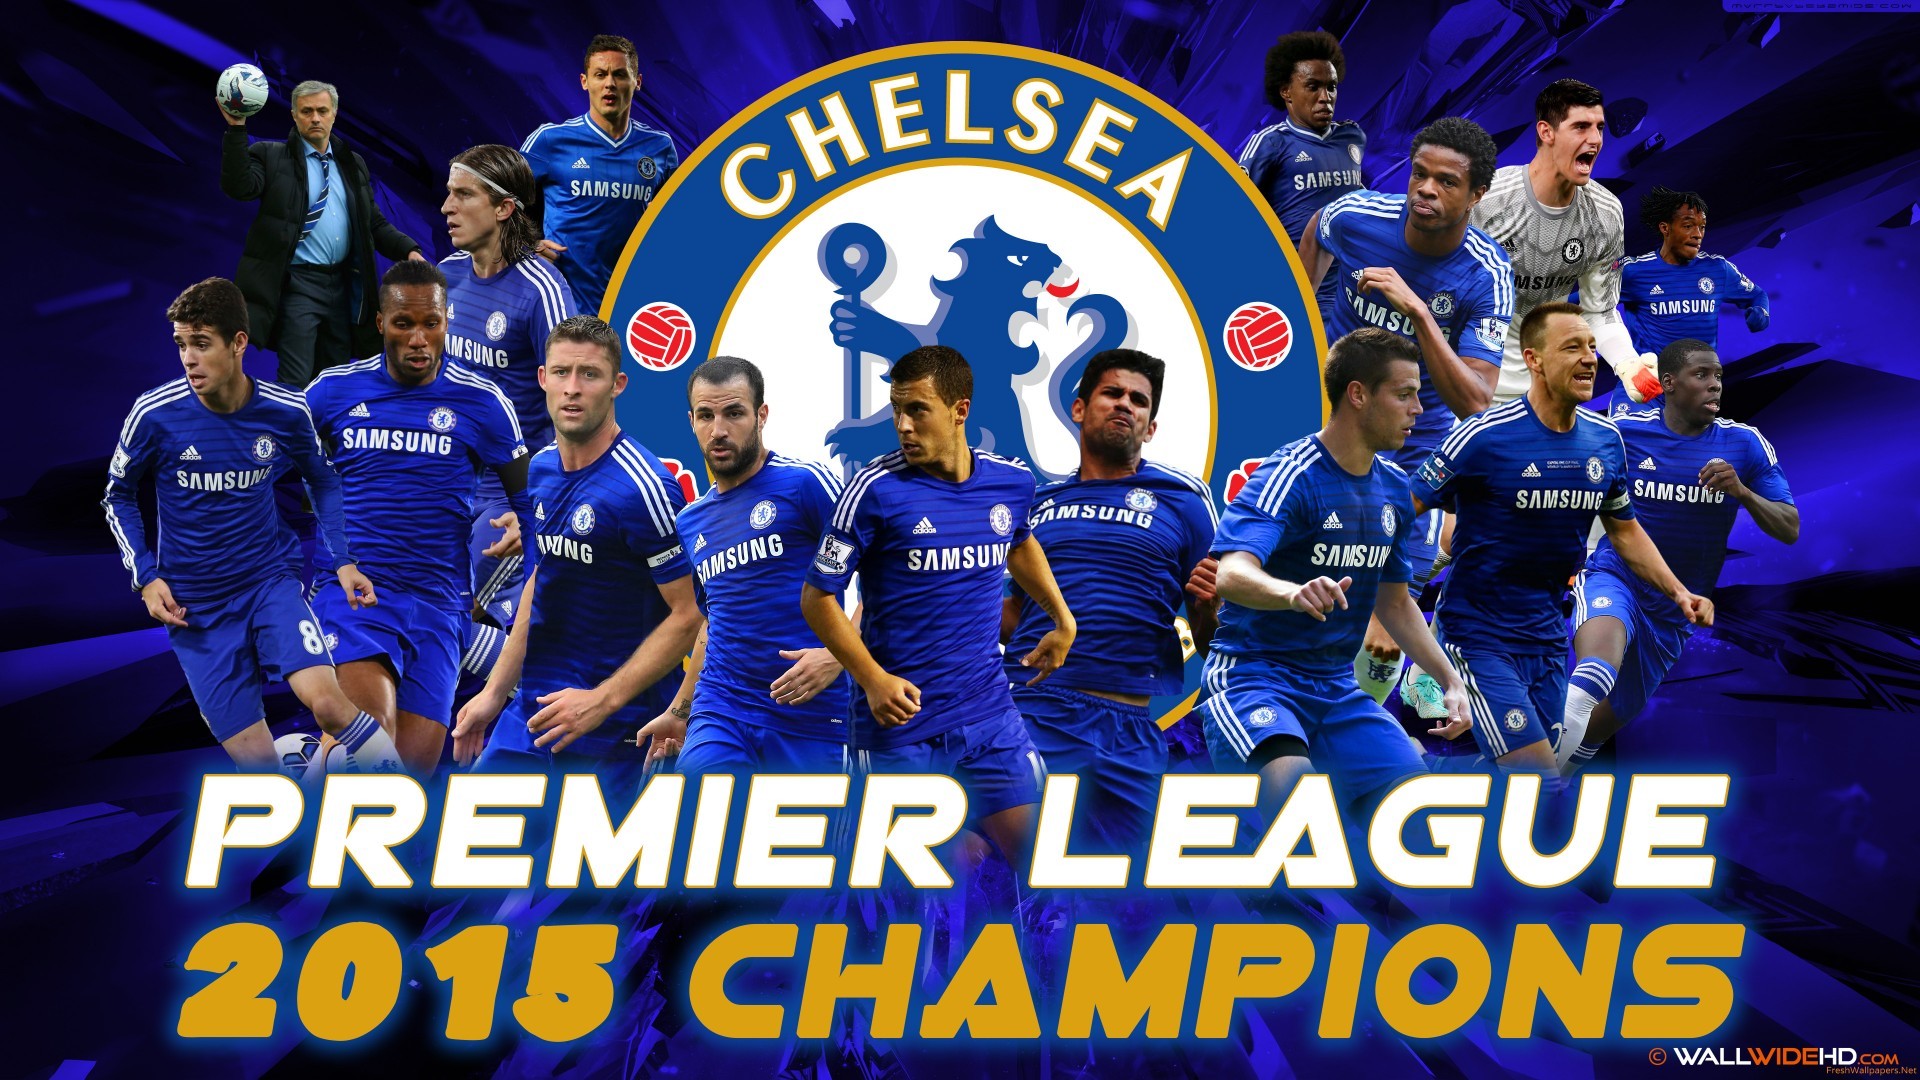 wallpapers chelsea player,team,championship,team sport,player,competition event